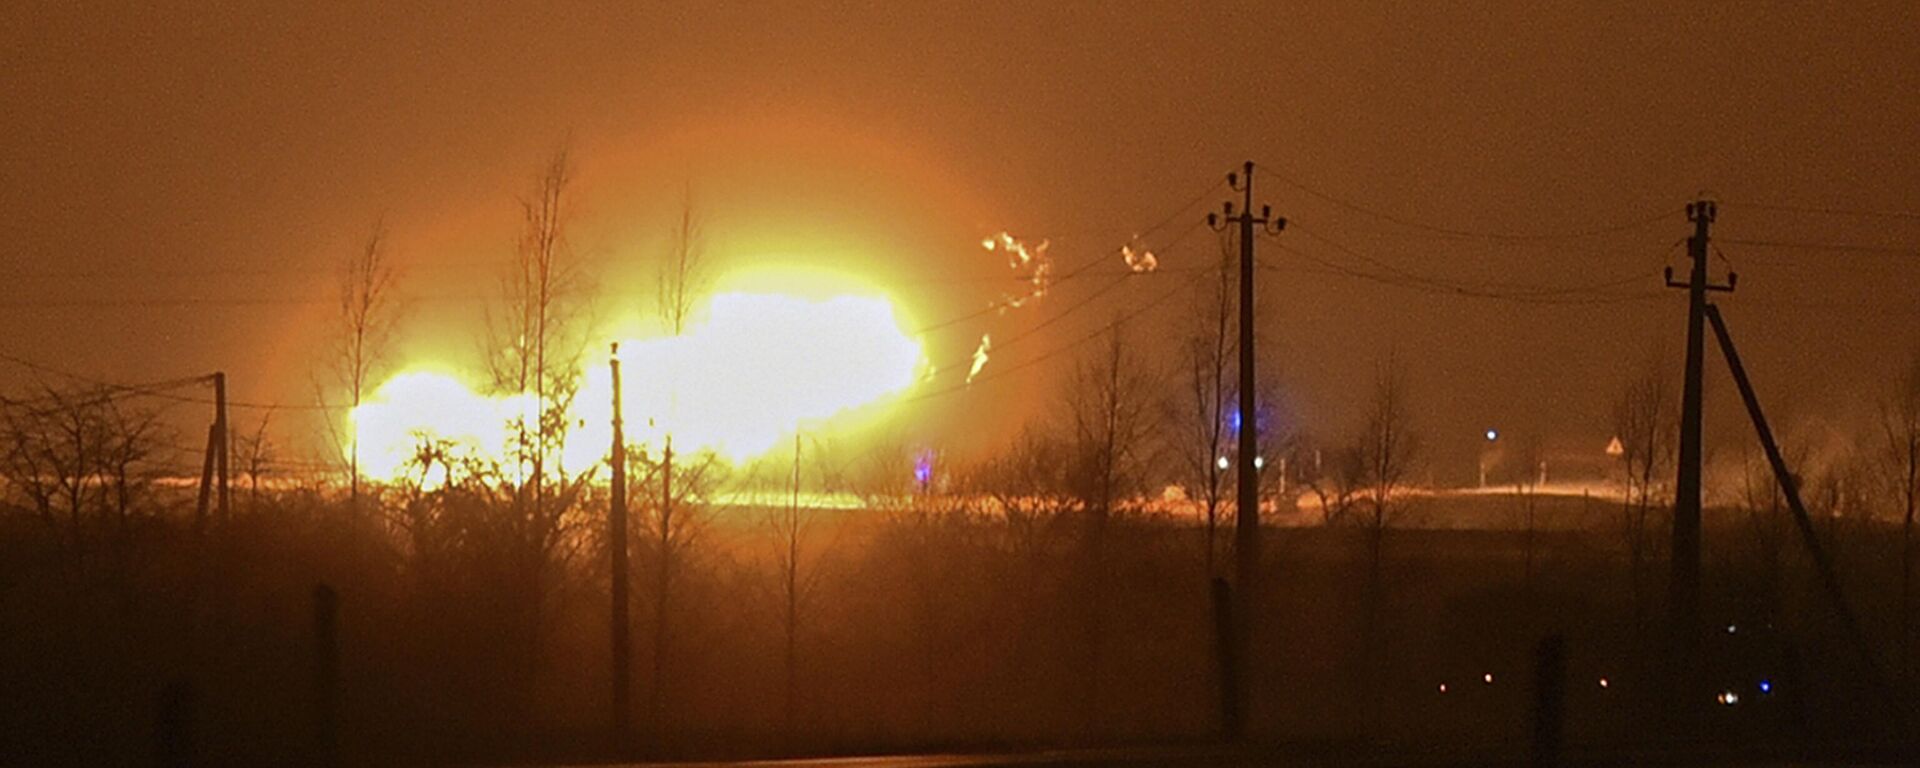 A flame rises after an explosion at a gas pipeline near Pasvalys, 175 km (109 miles) north of Vilnius in northern Lithuania on Friday, Jan. 13, 2023. Officials say an explosion has occurred in a pipeline in central Lithuania carrying natural gas to the north of the country and neighboring Latvia but no supply disruptions or injuries were reported. Baltic media reported that Friday's blast sent flames up to 50 meters (164 feet) into the sky and forced the protective evacuation of a nearby village. - Sputnik International, 1920, 13.01.2023